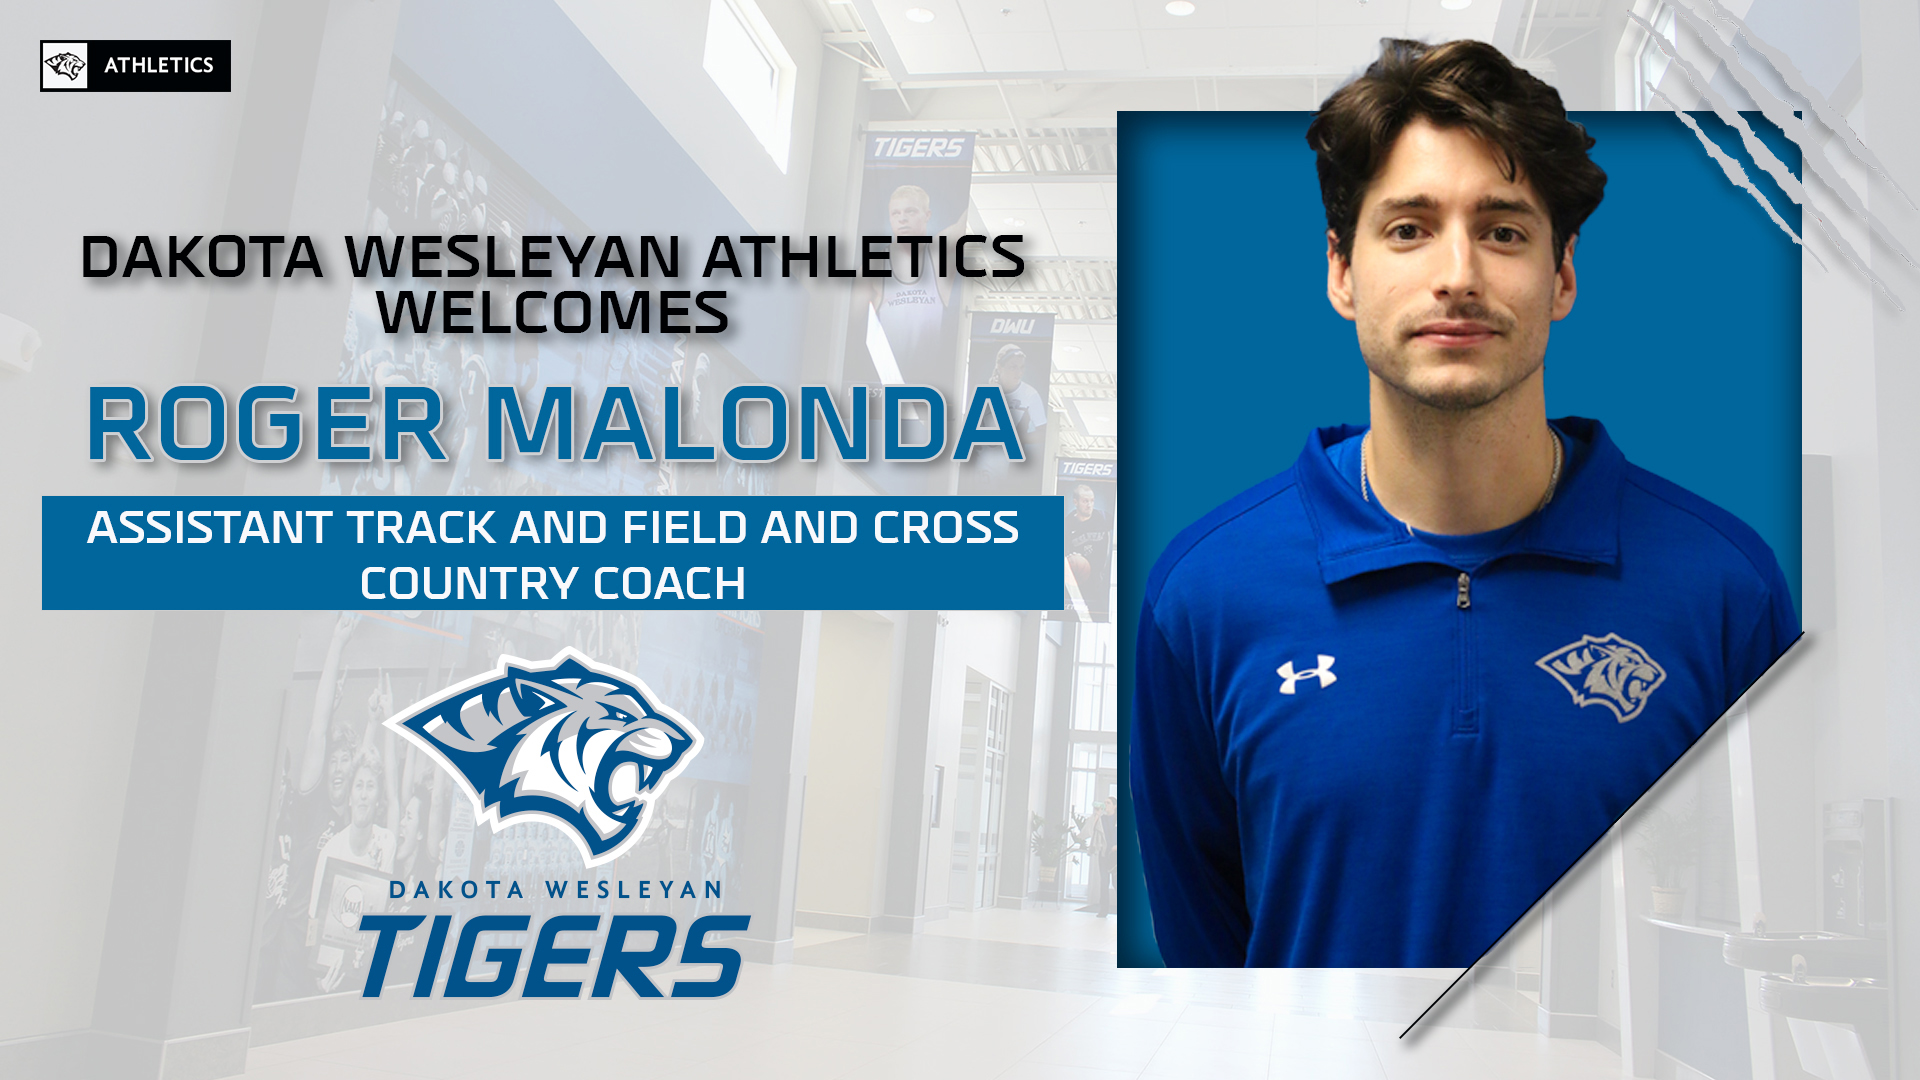 ROGER MALONDA ADDED TO CROSS COUNTRY/TRACK & FIELD STAFF